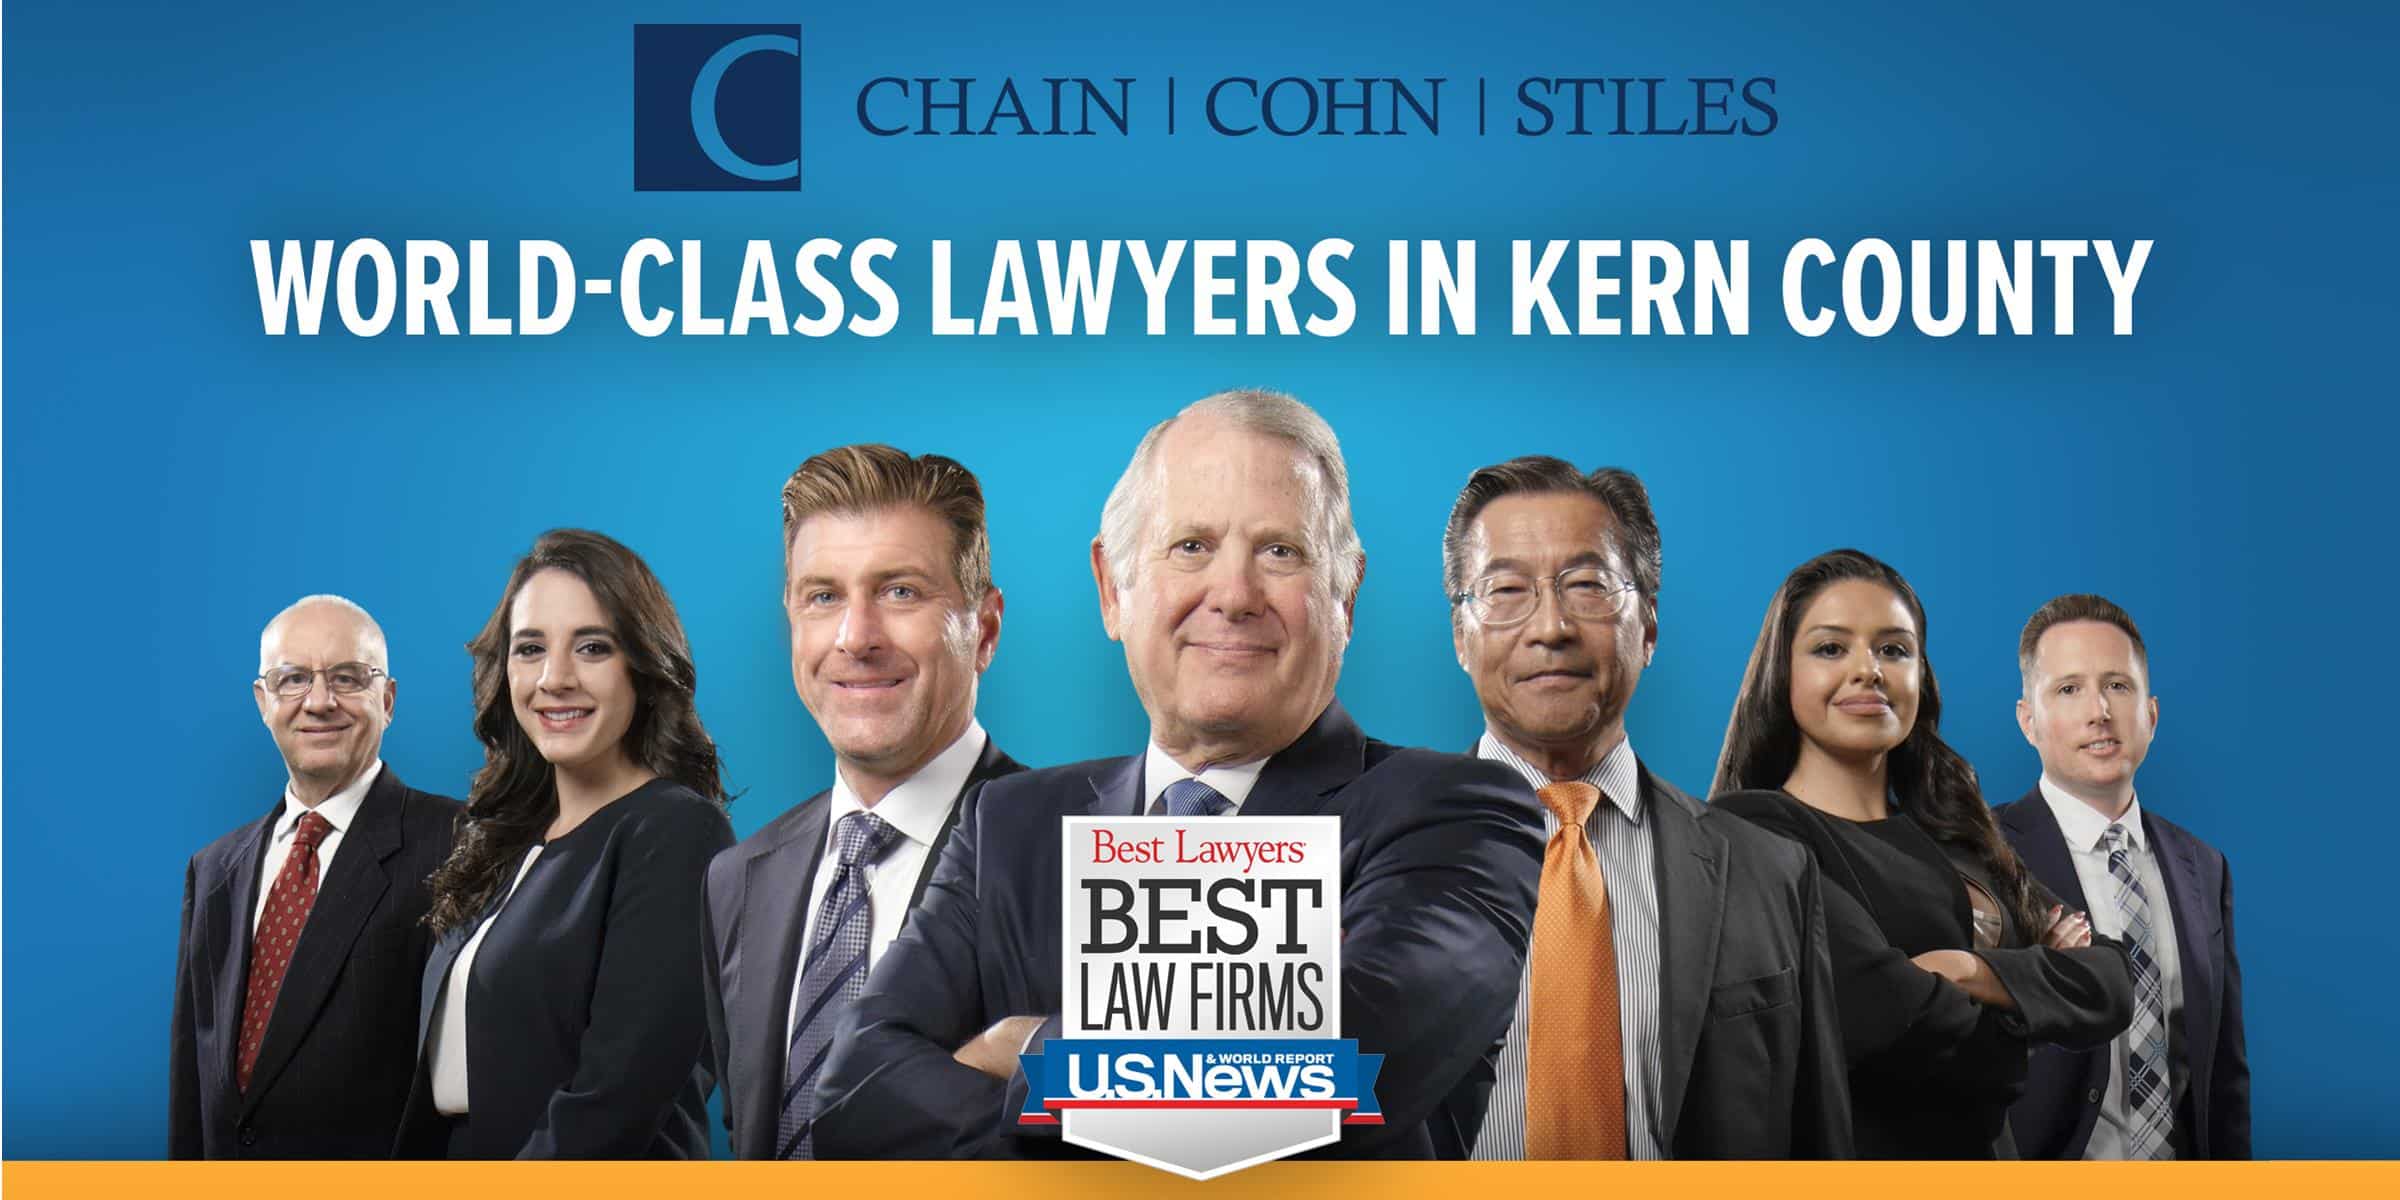 Awards give Chain | Cohn | Clark ‘world-class’ law firm, attorneys designations (Bakersfield Life Magazine)